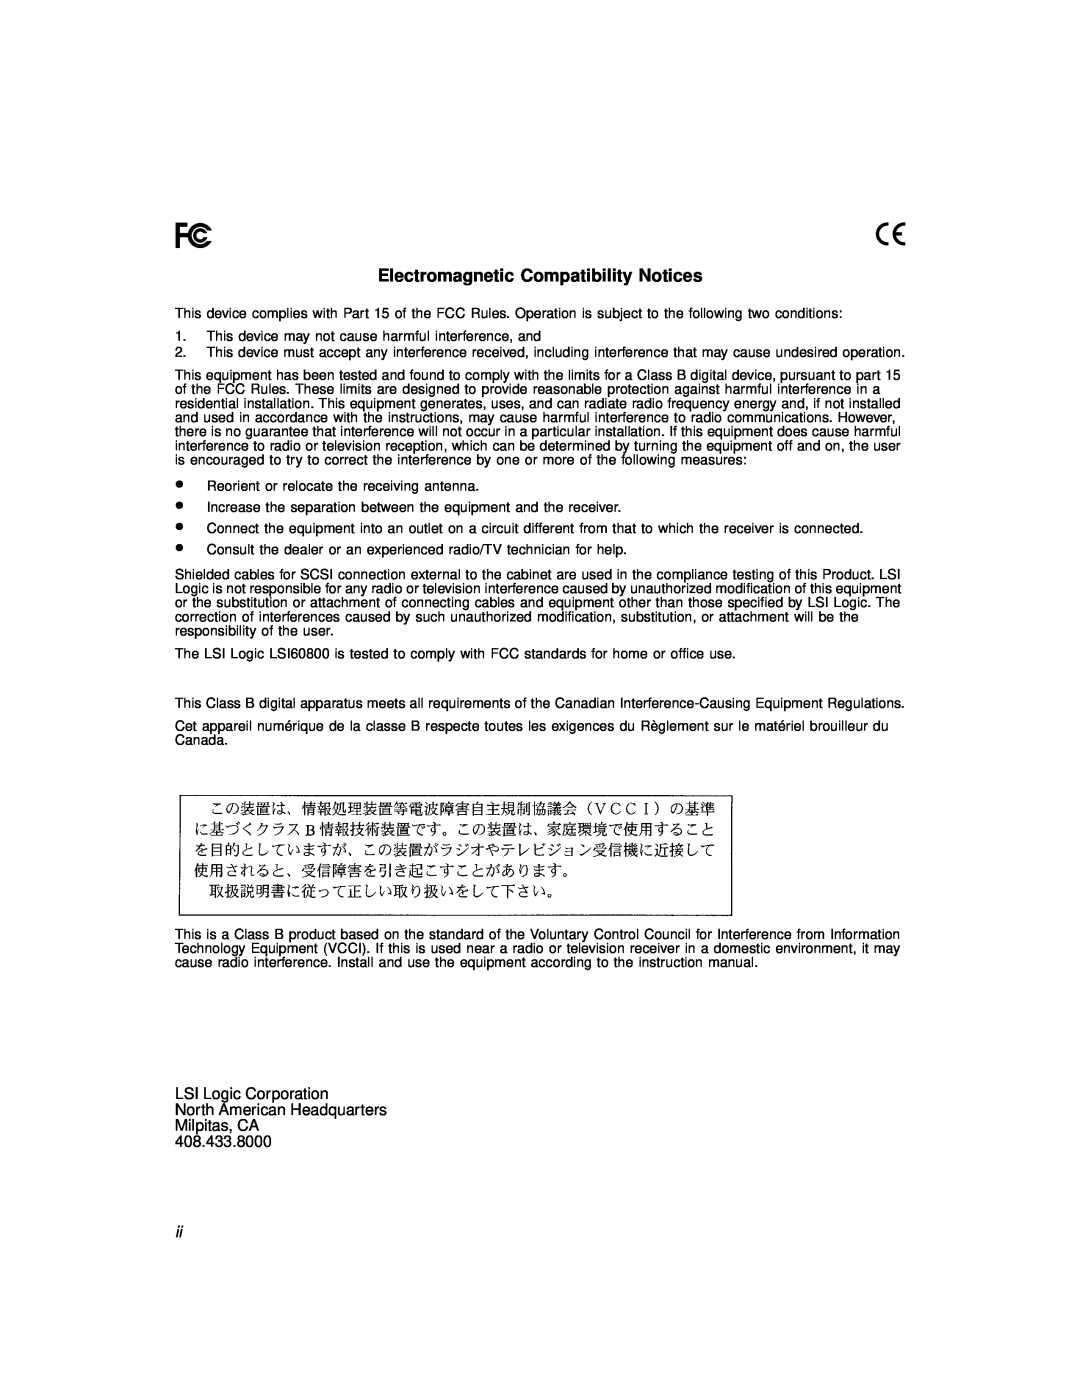 LSI 60800 manual Electromagnetic Compatibility Notices, LSI Logic Corporation North American Headquarters Milpitas, CA 